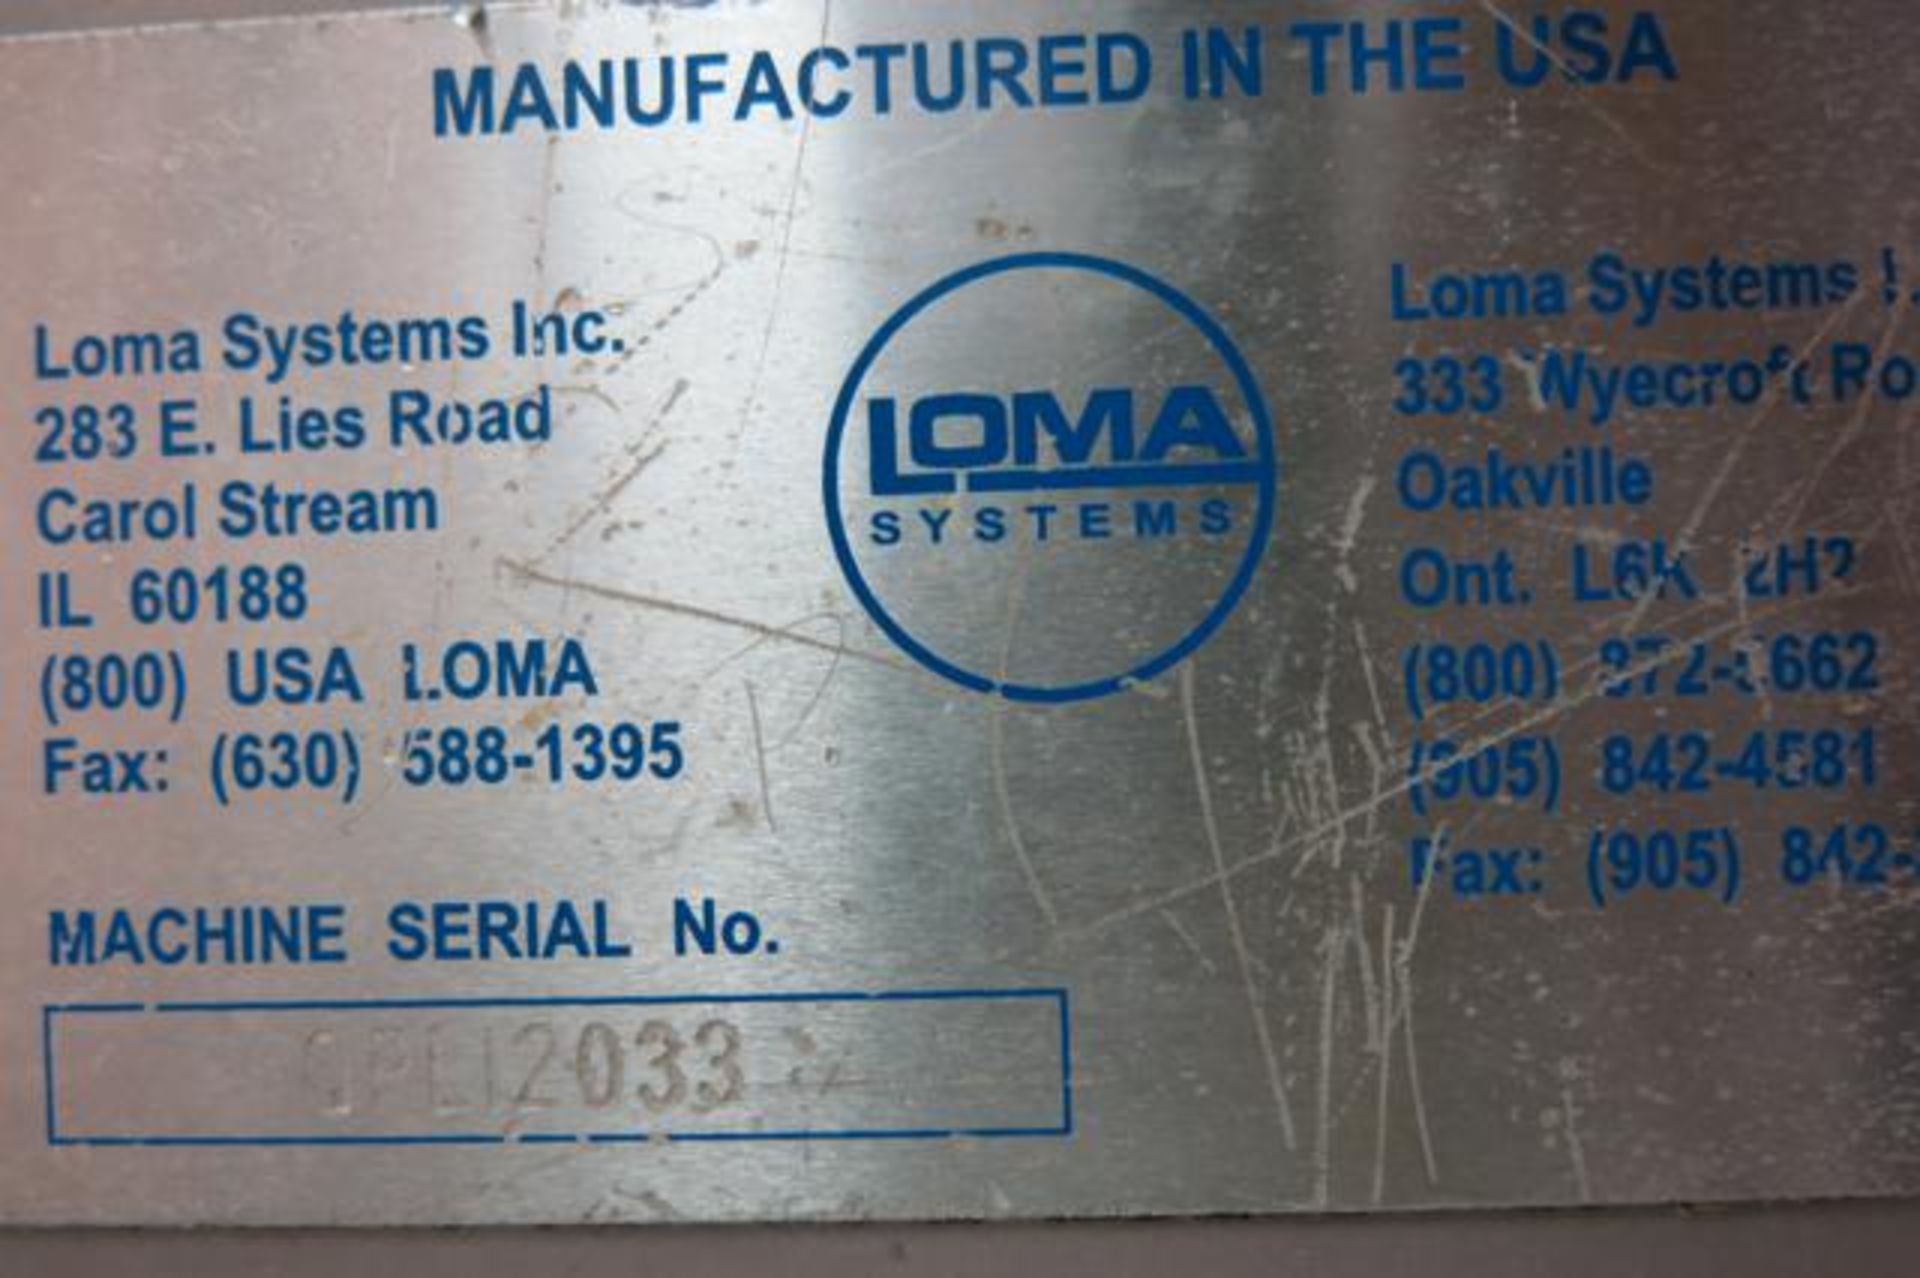 LOMA, IQ2, STAINLESS STEEL, PIPELINE, METAL DETECTOR, 4", 2003, S/N QP12033 - Image 11 of 11